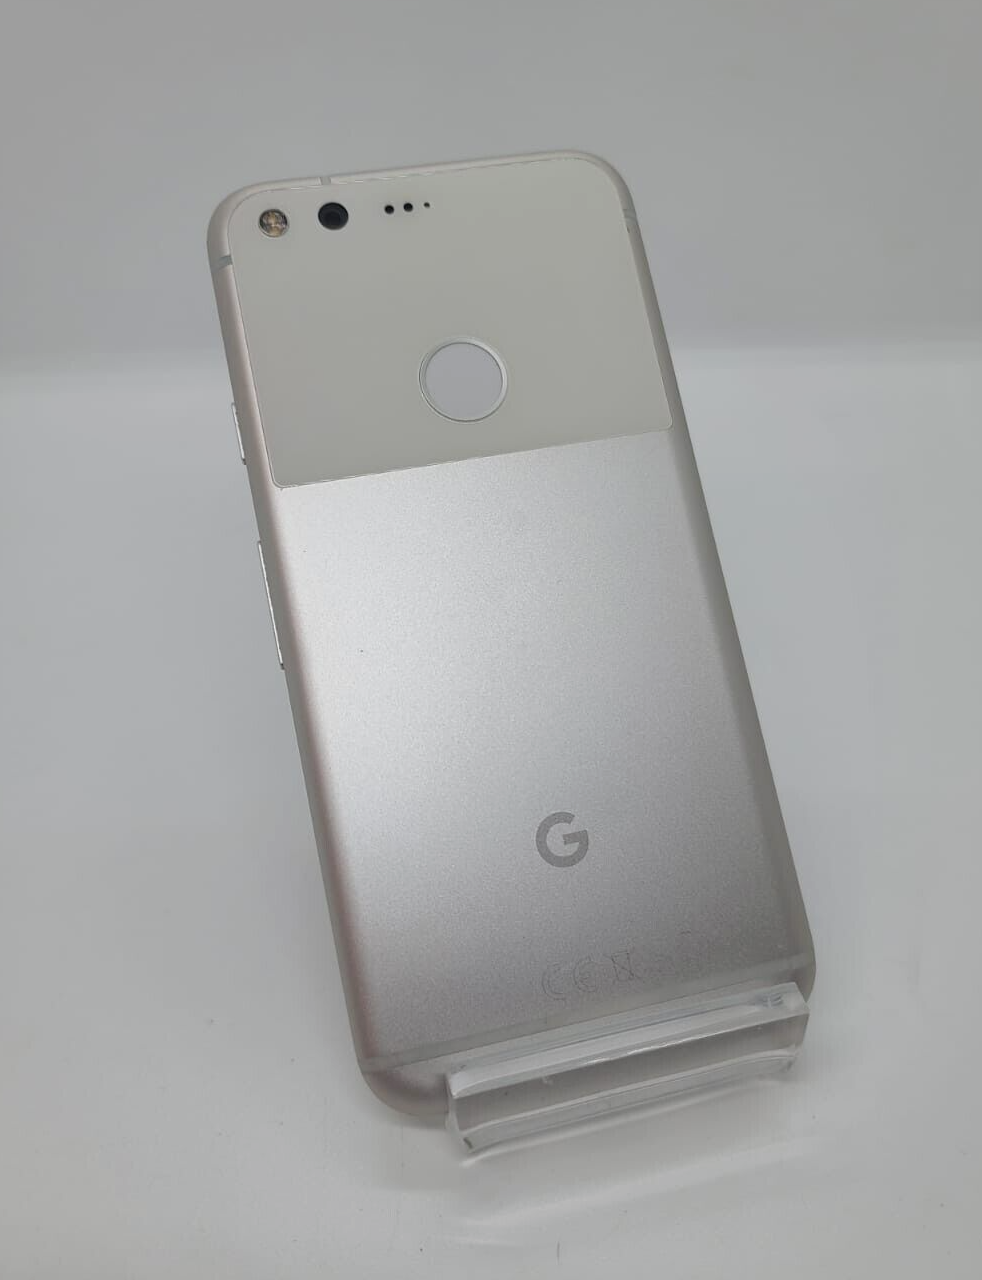 Google Pixel 128GB Unlocked Android 4GLTE Smartphone G-2PW4100 FOR PARTS WORKING